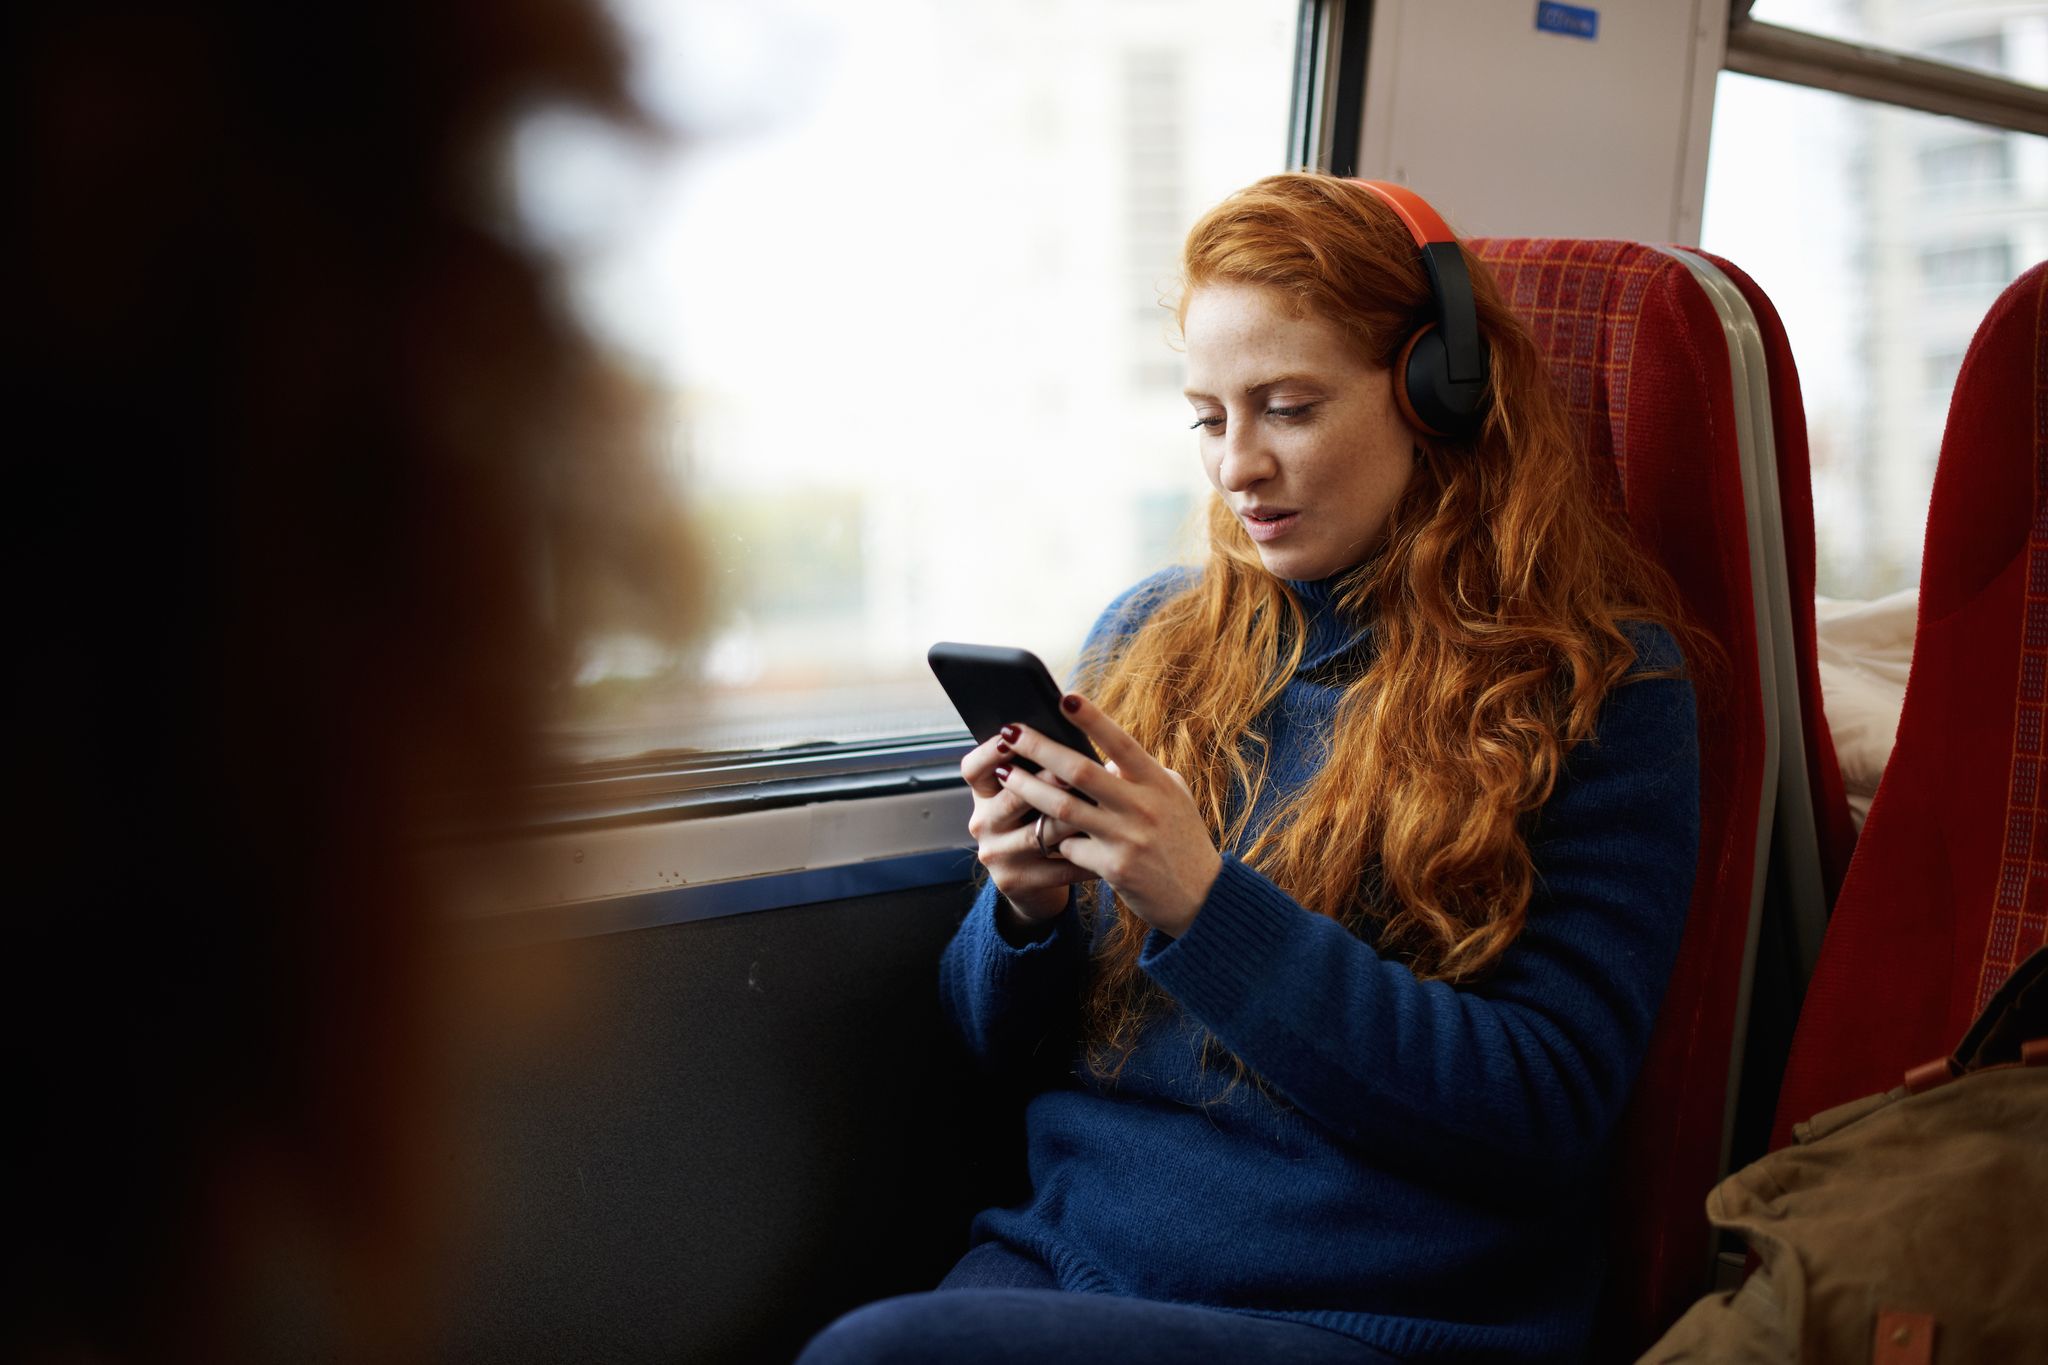 Woman on train listening to music on mobile phone with headphones, London